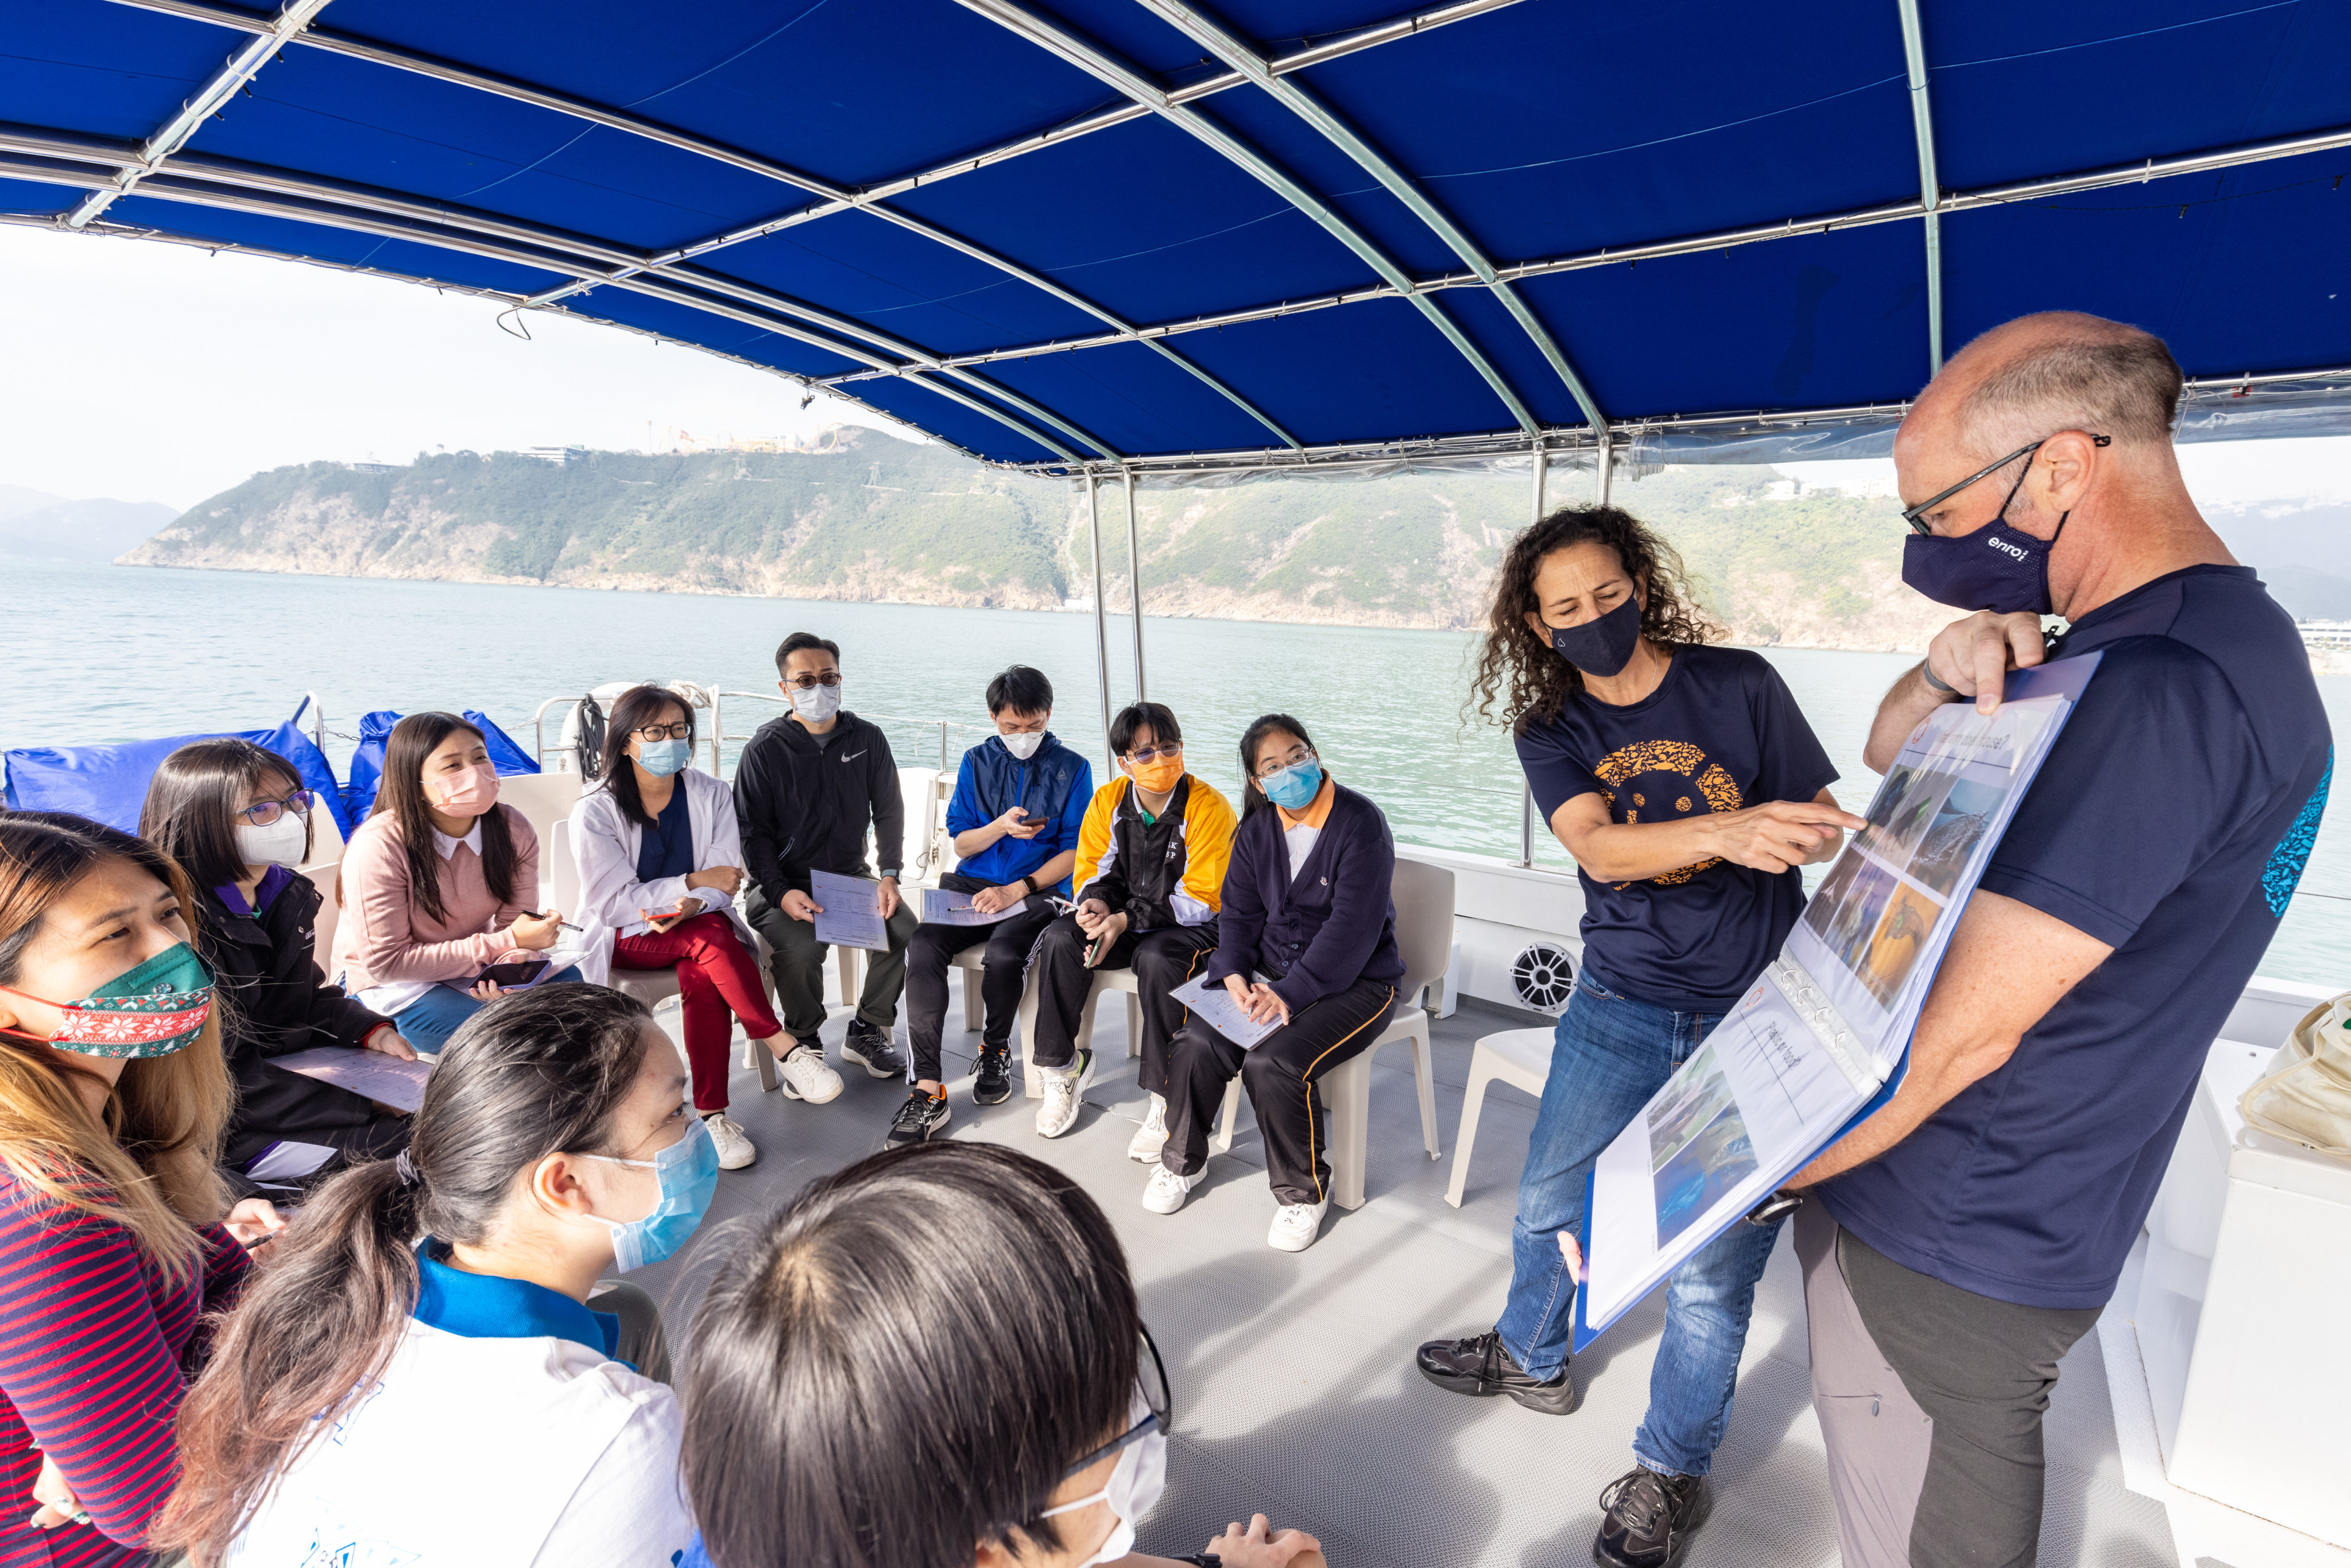 Dana Winograd, Director-Operations at Plastic Free Seas, teaches students about plastic pollution and the devastating effect it has on marine life. Photo: Handout